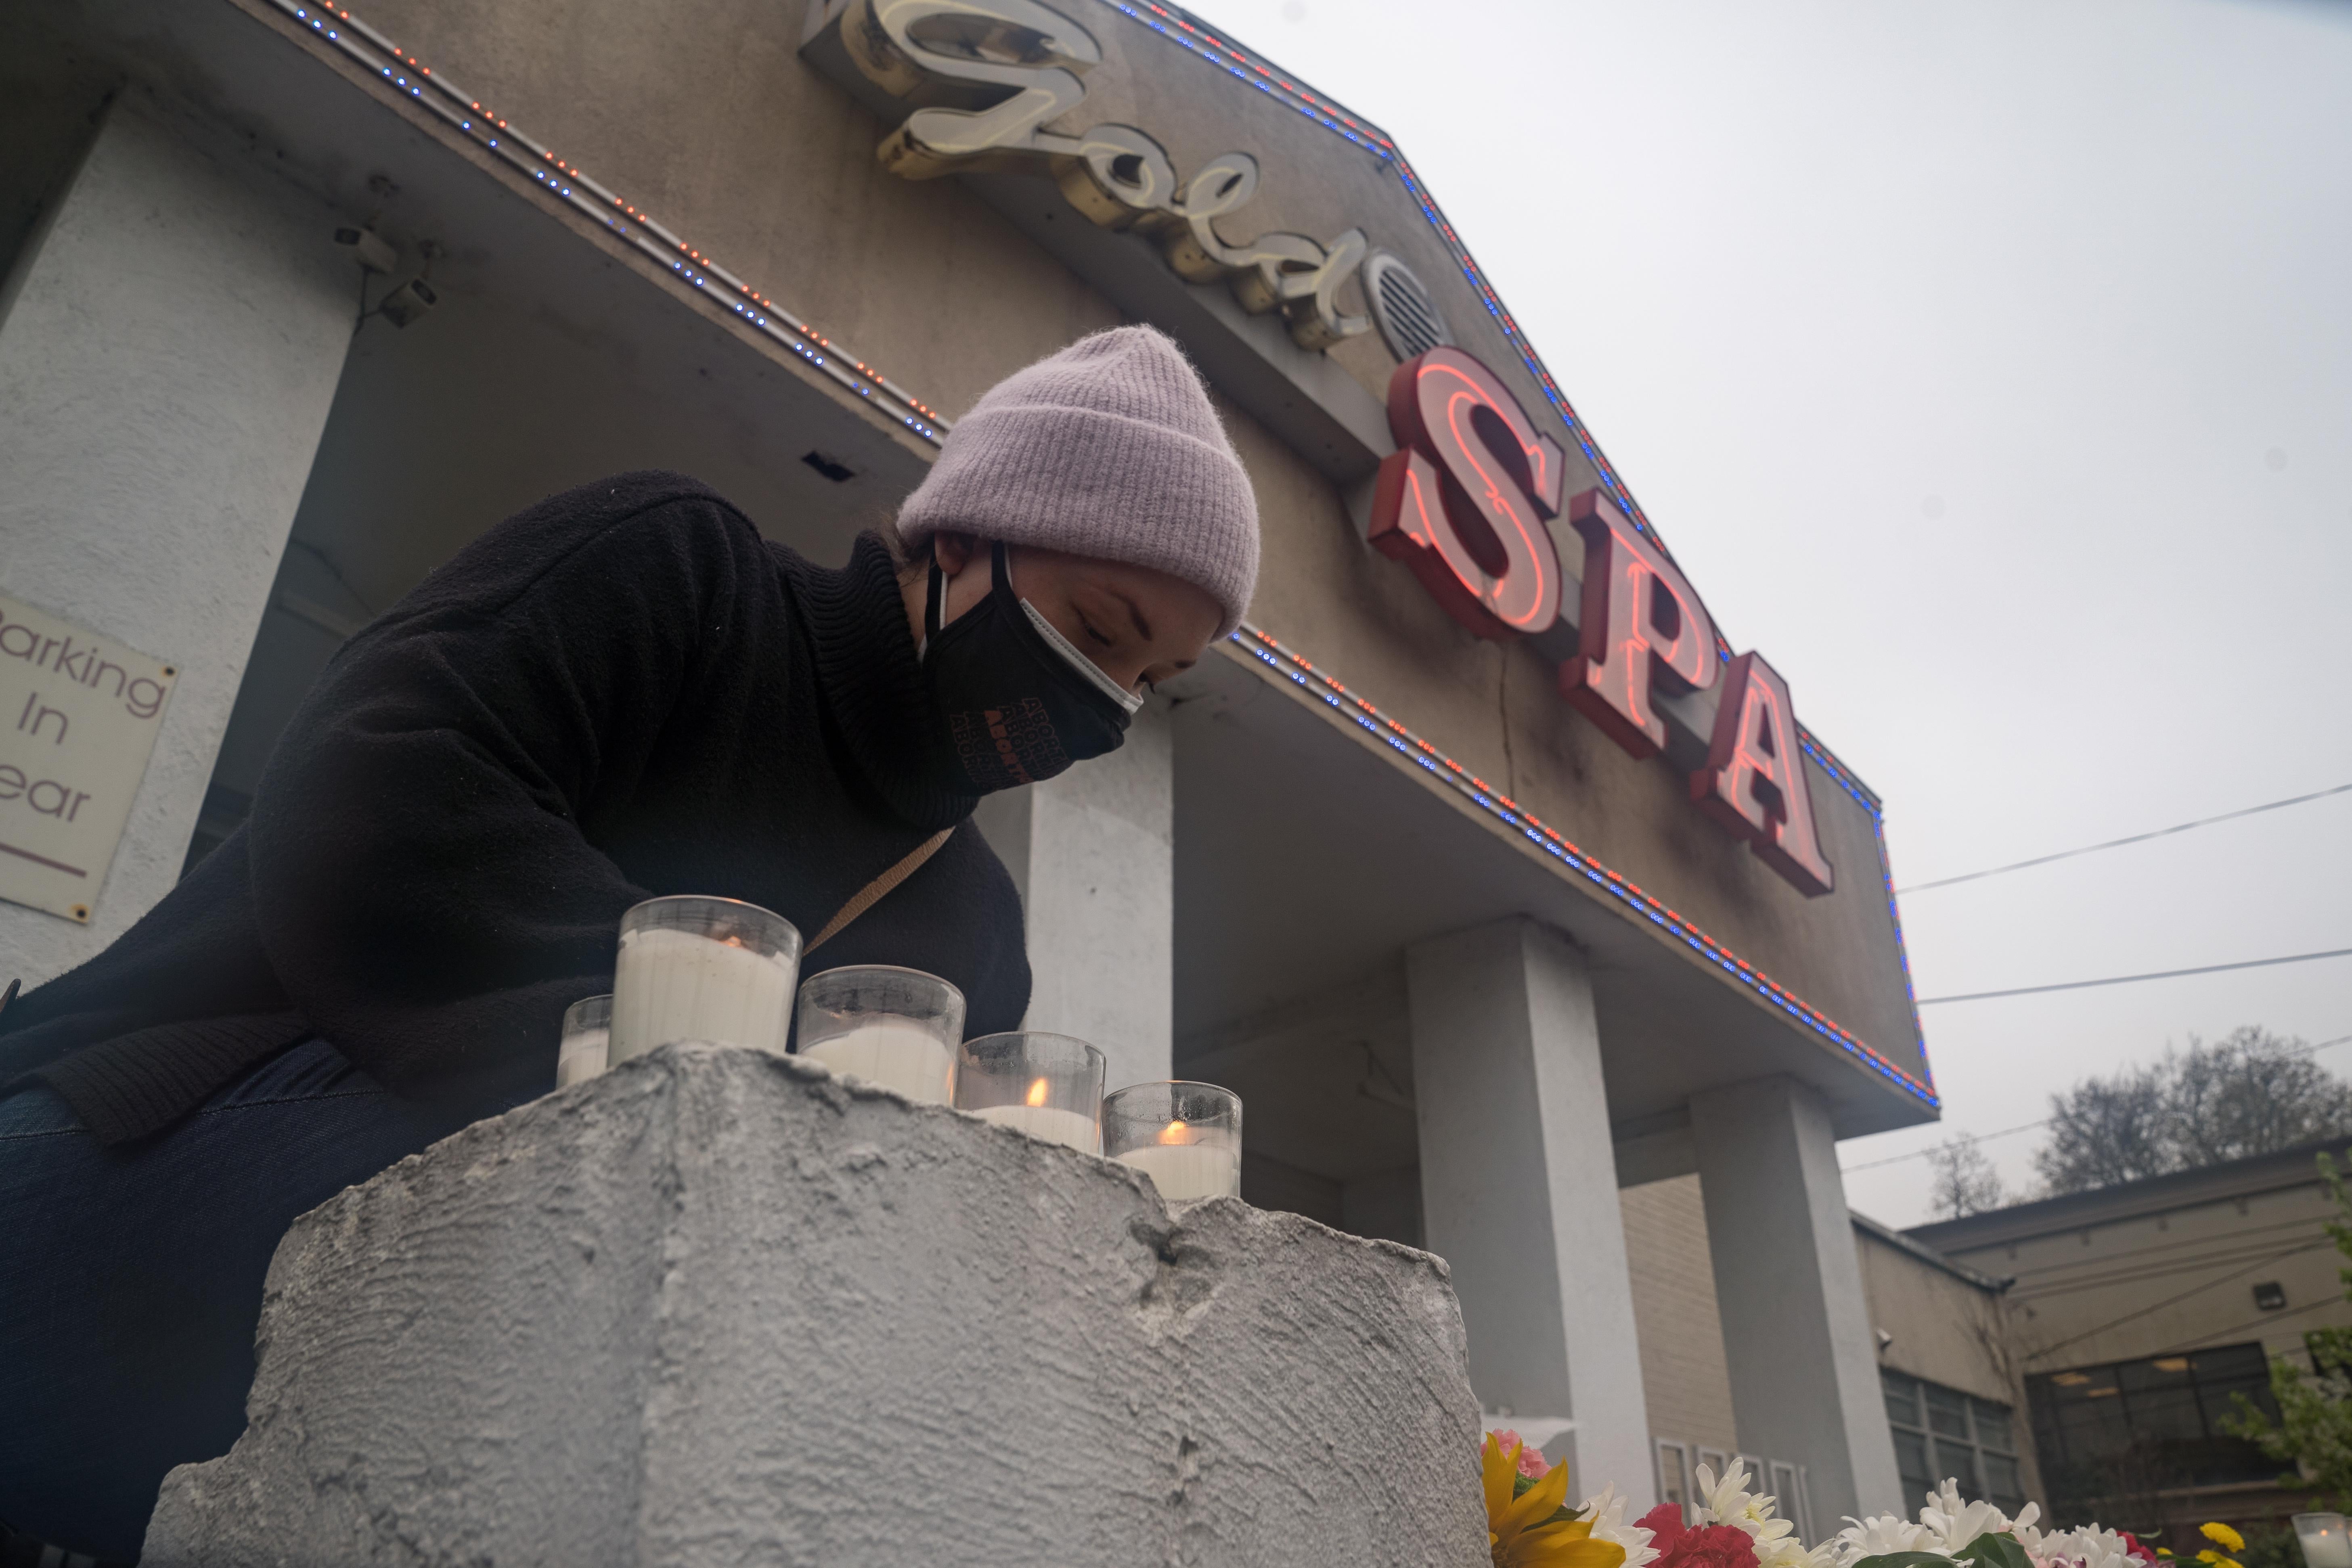 Mourner Erica Gonzalez leaves flowers at a memorial with candles outside Gold Spa.